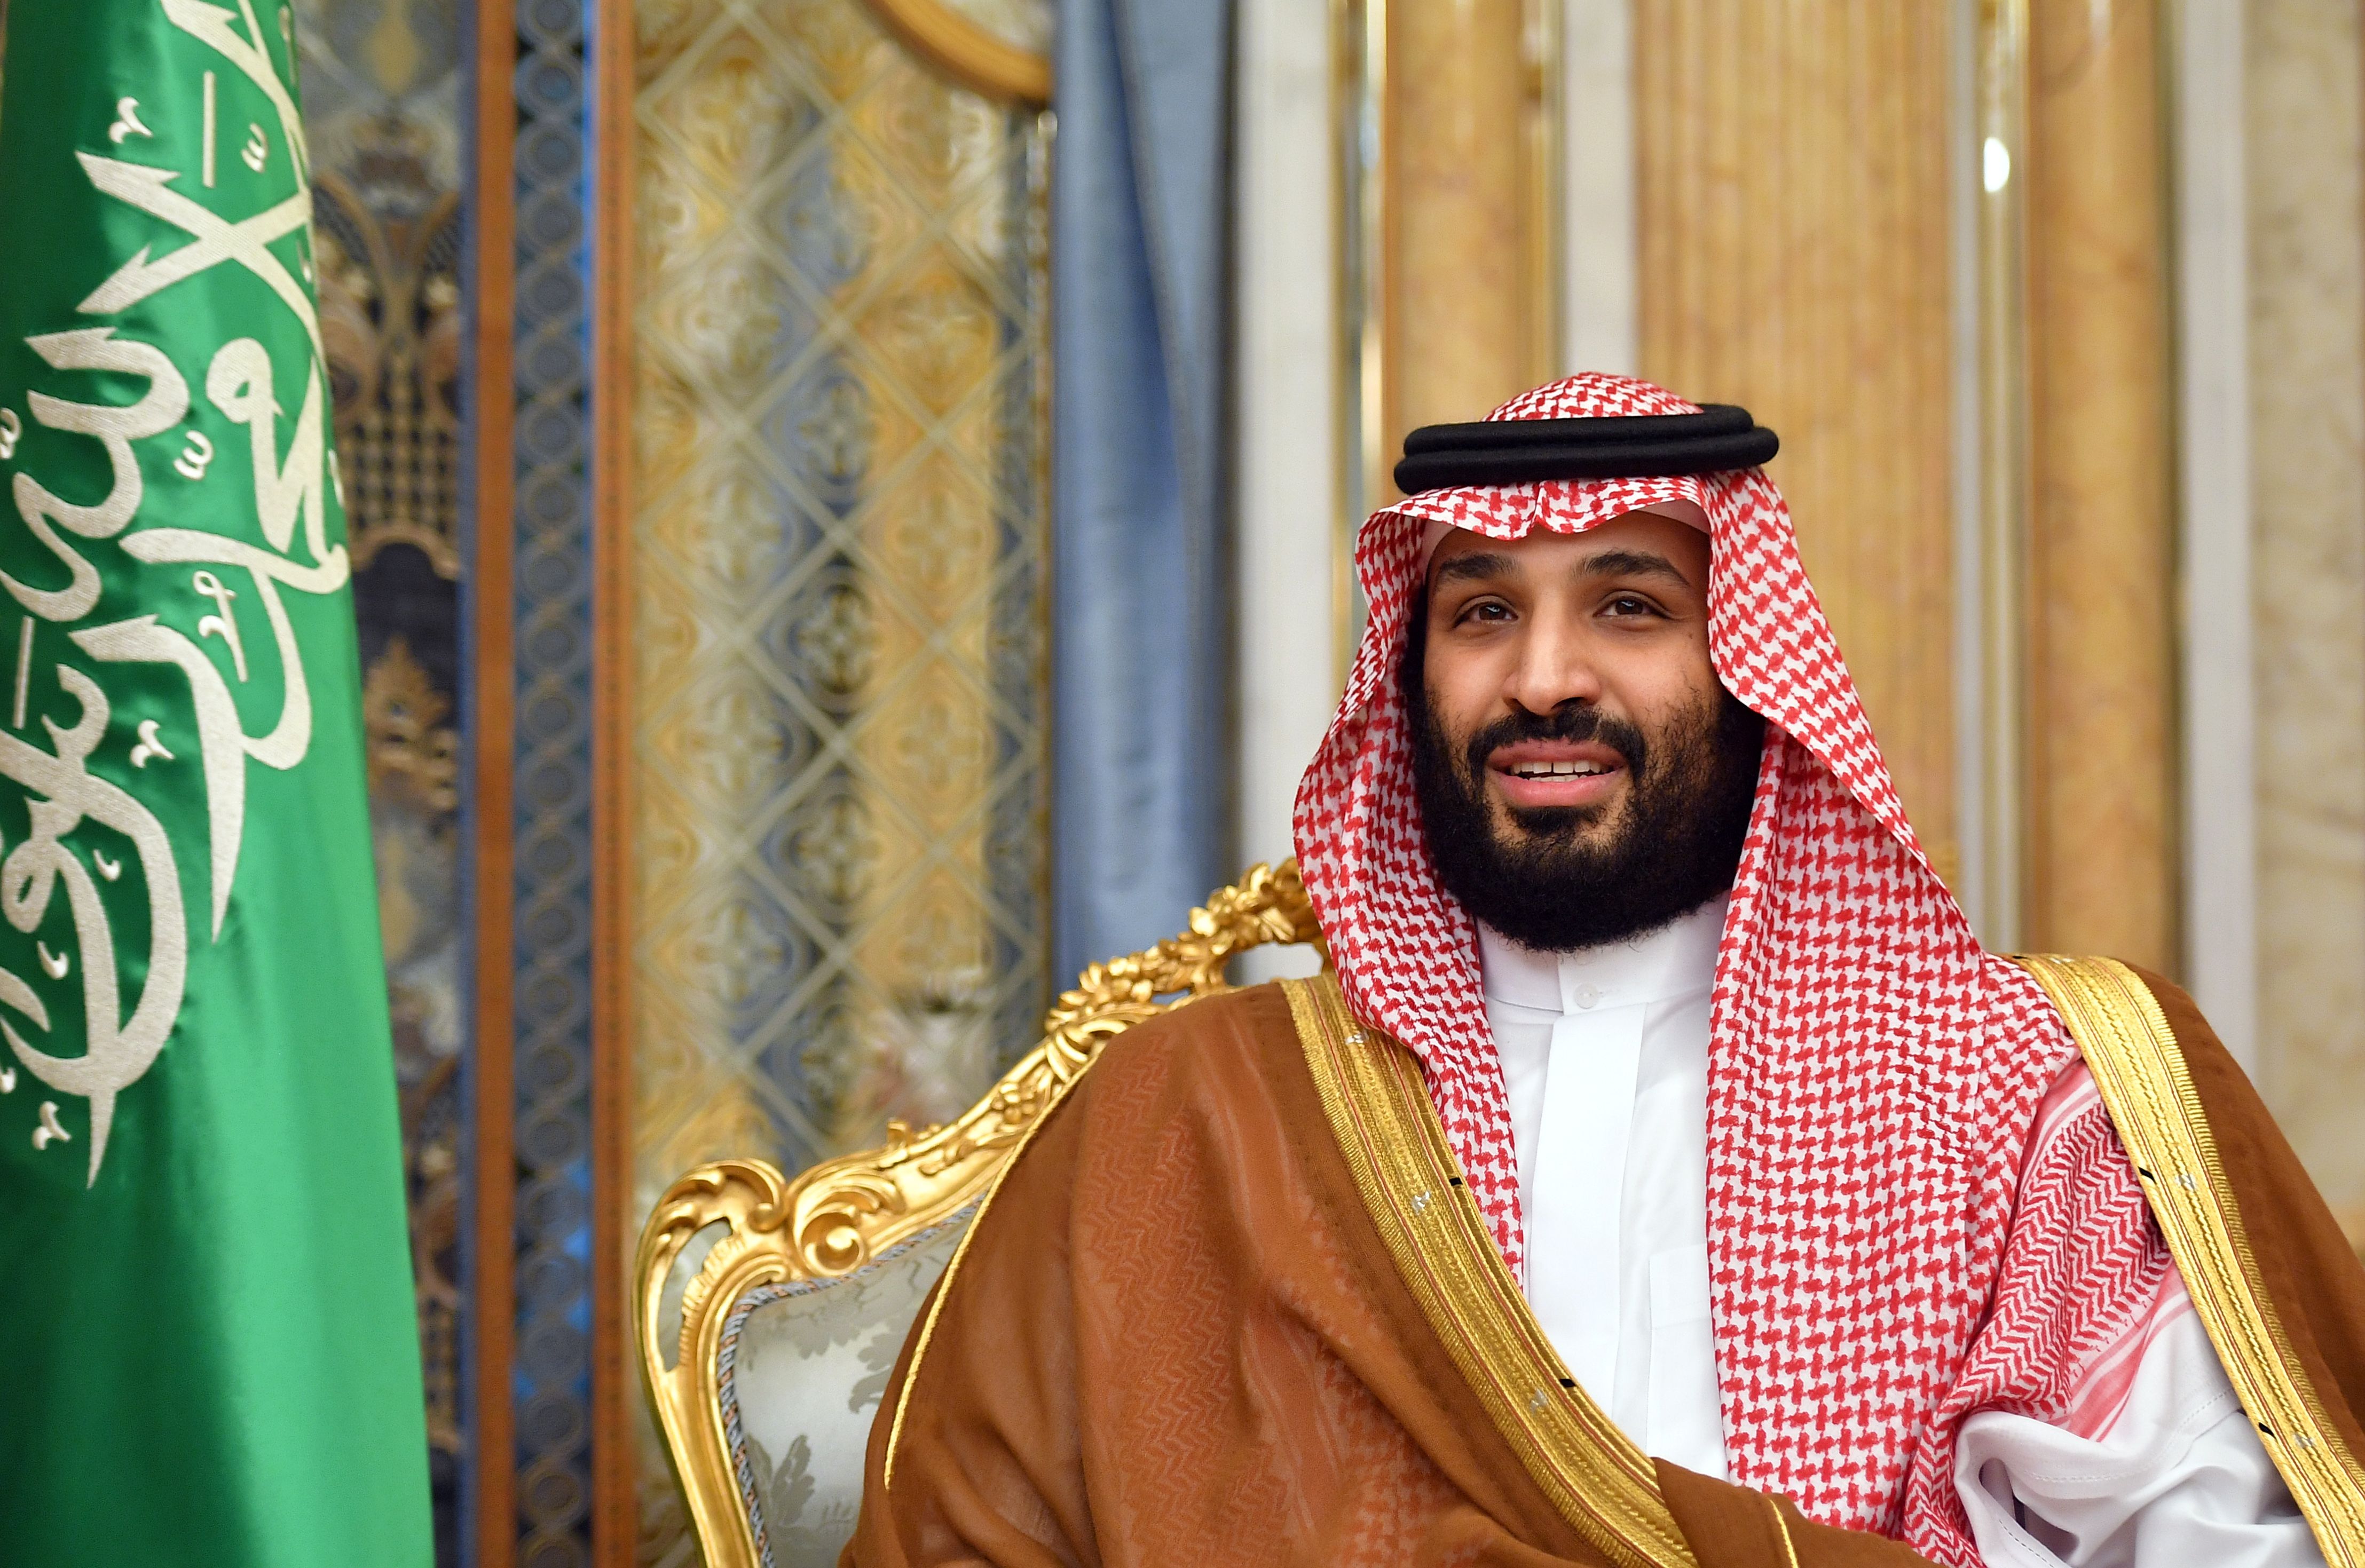 The crown prince, in traditional headscarf and robes, sits in a gold-backed chair with a Saudi flag nearby.